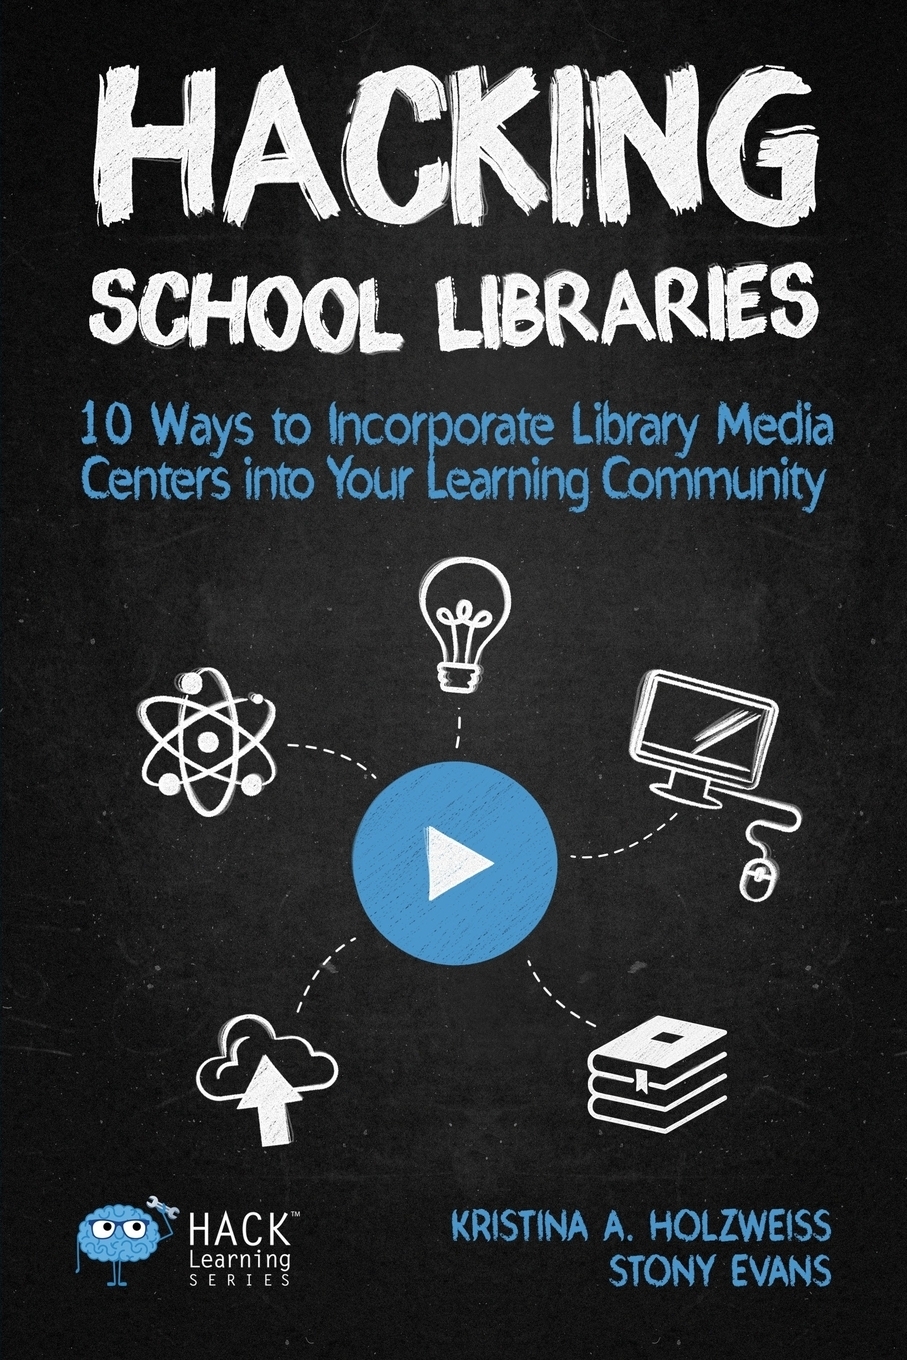 фото Hacking School Libraries. 10 Ways to Incorporate Library Media Centers into Your Learning Community